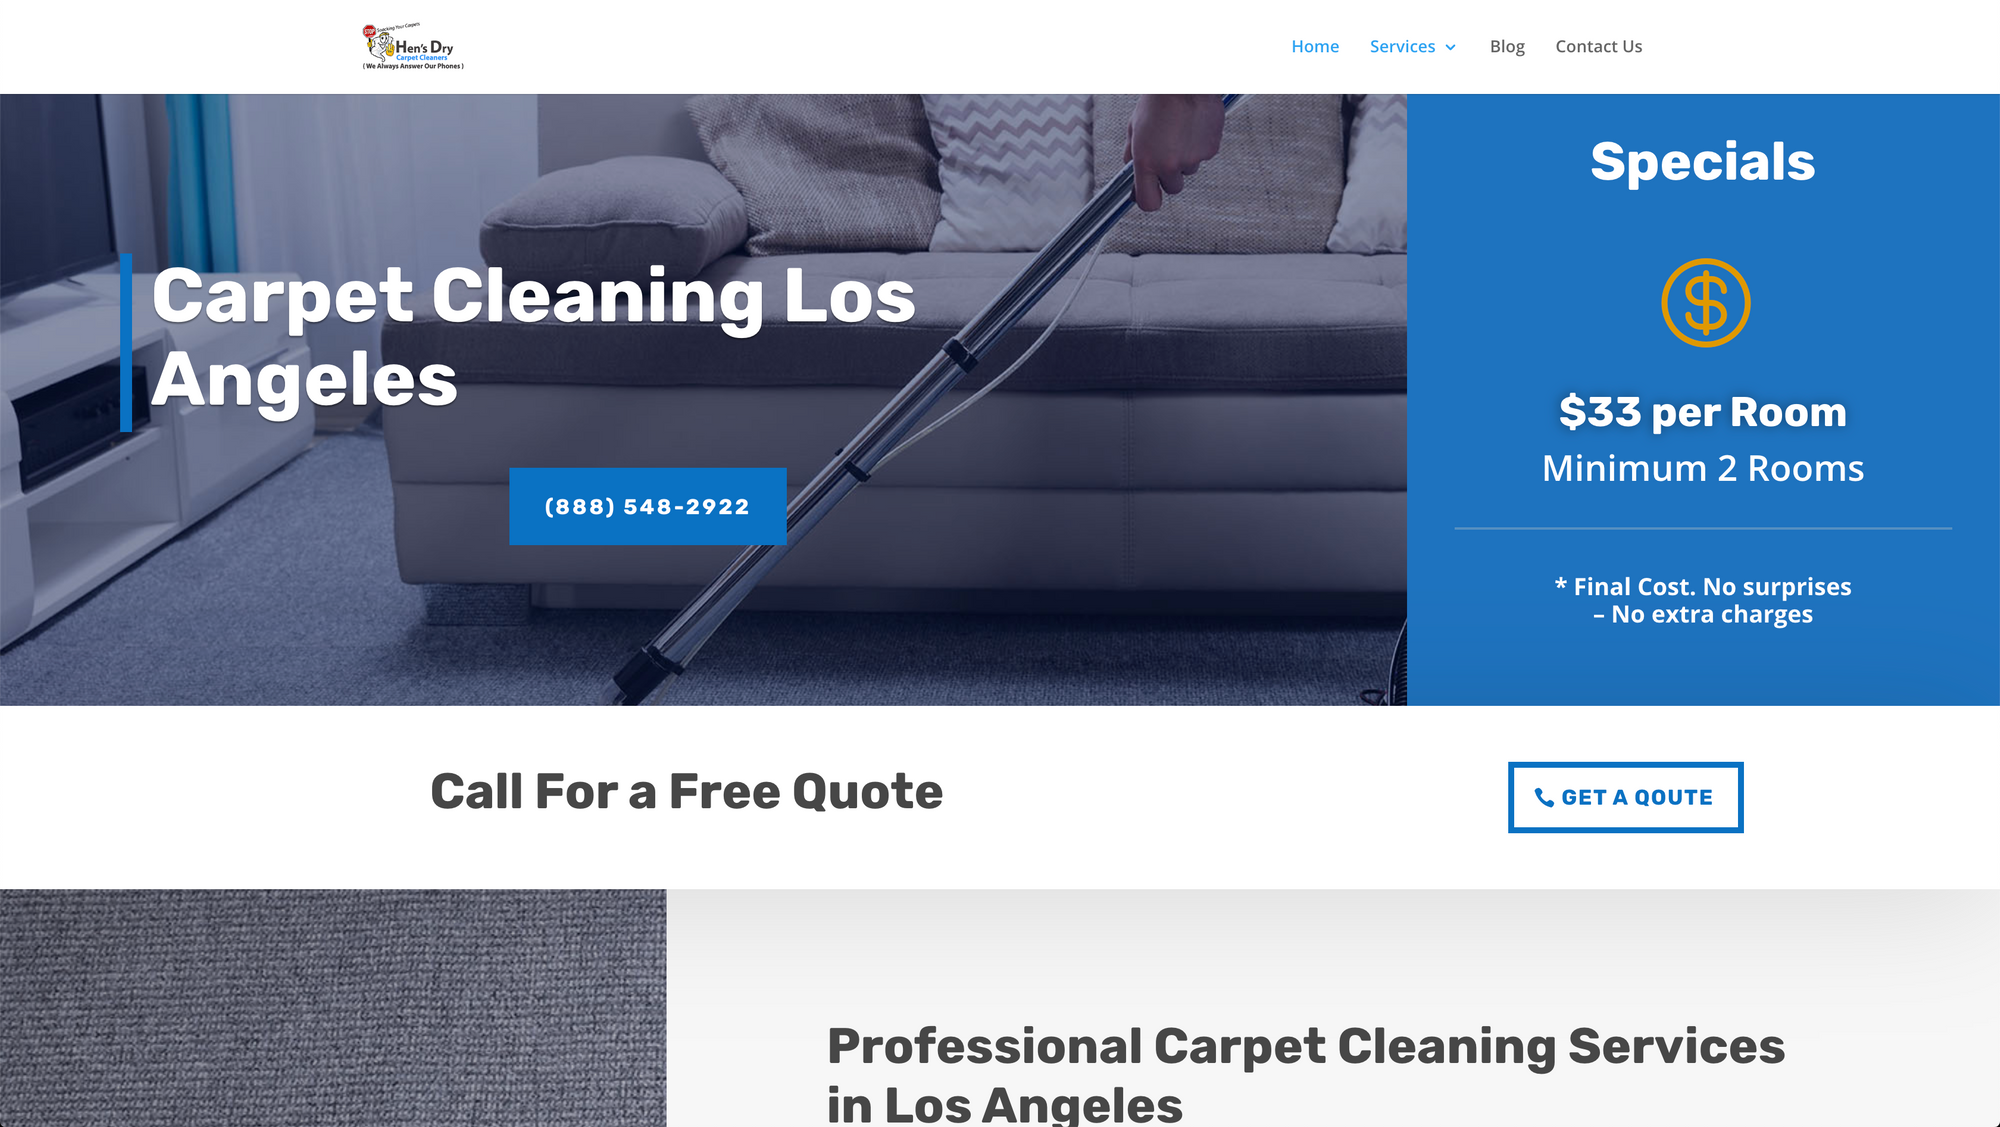 Hens Dry La Cleaning